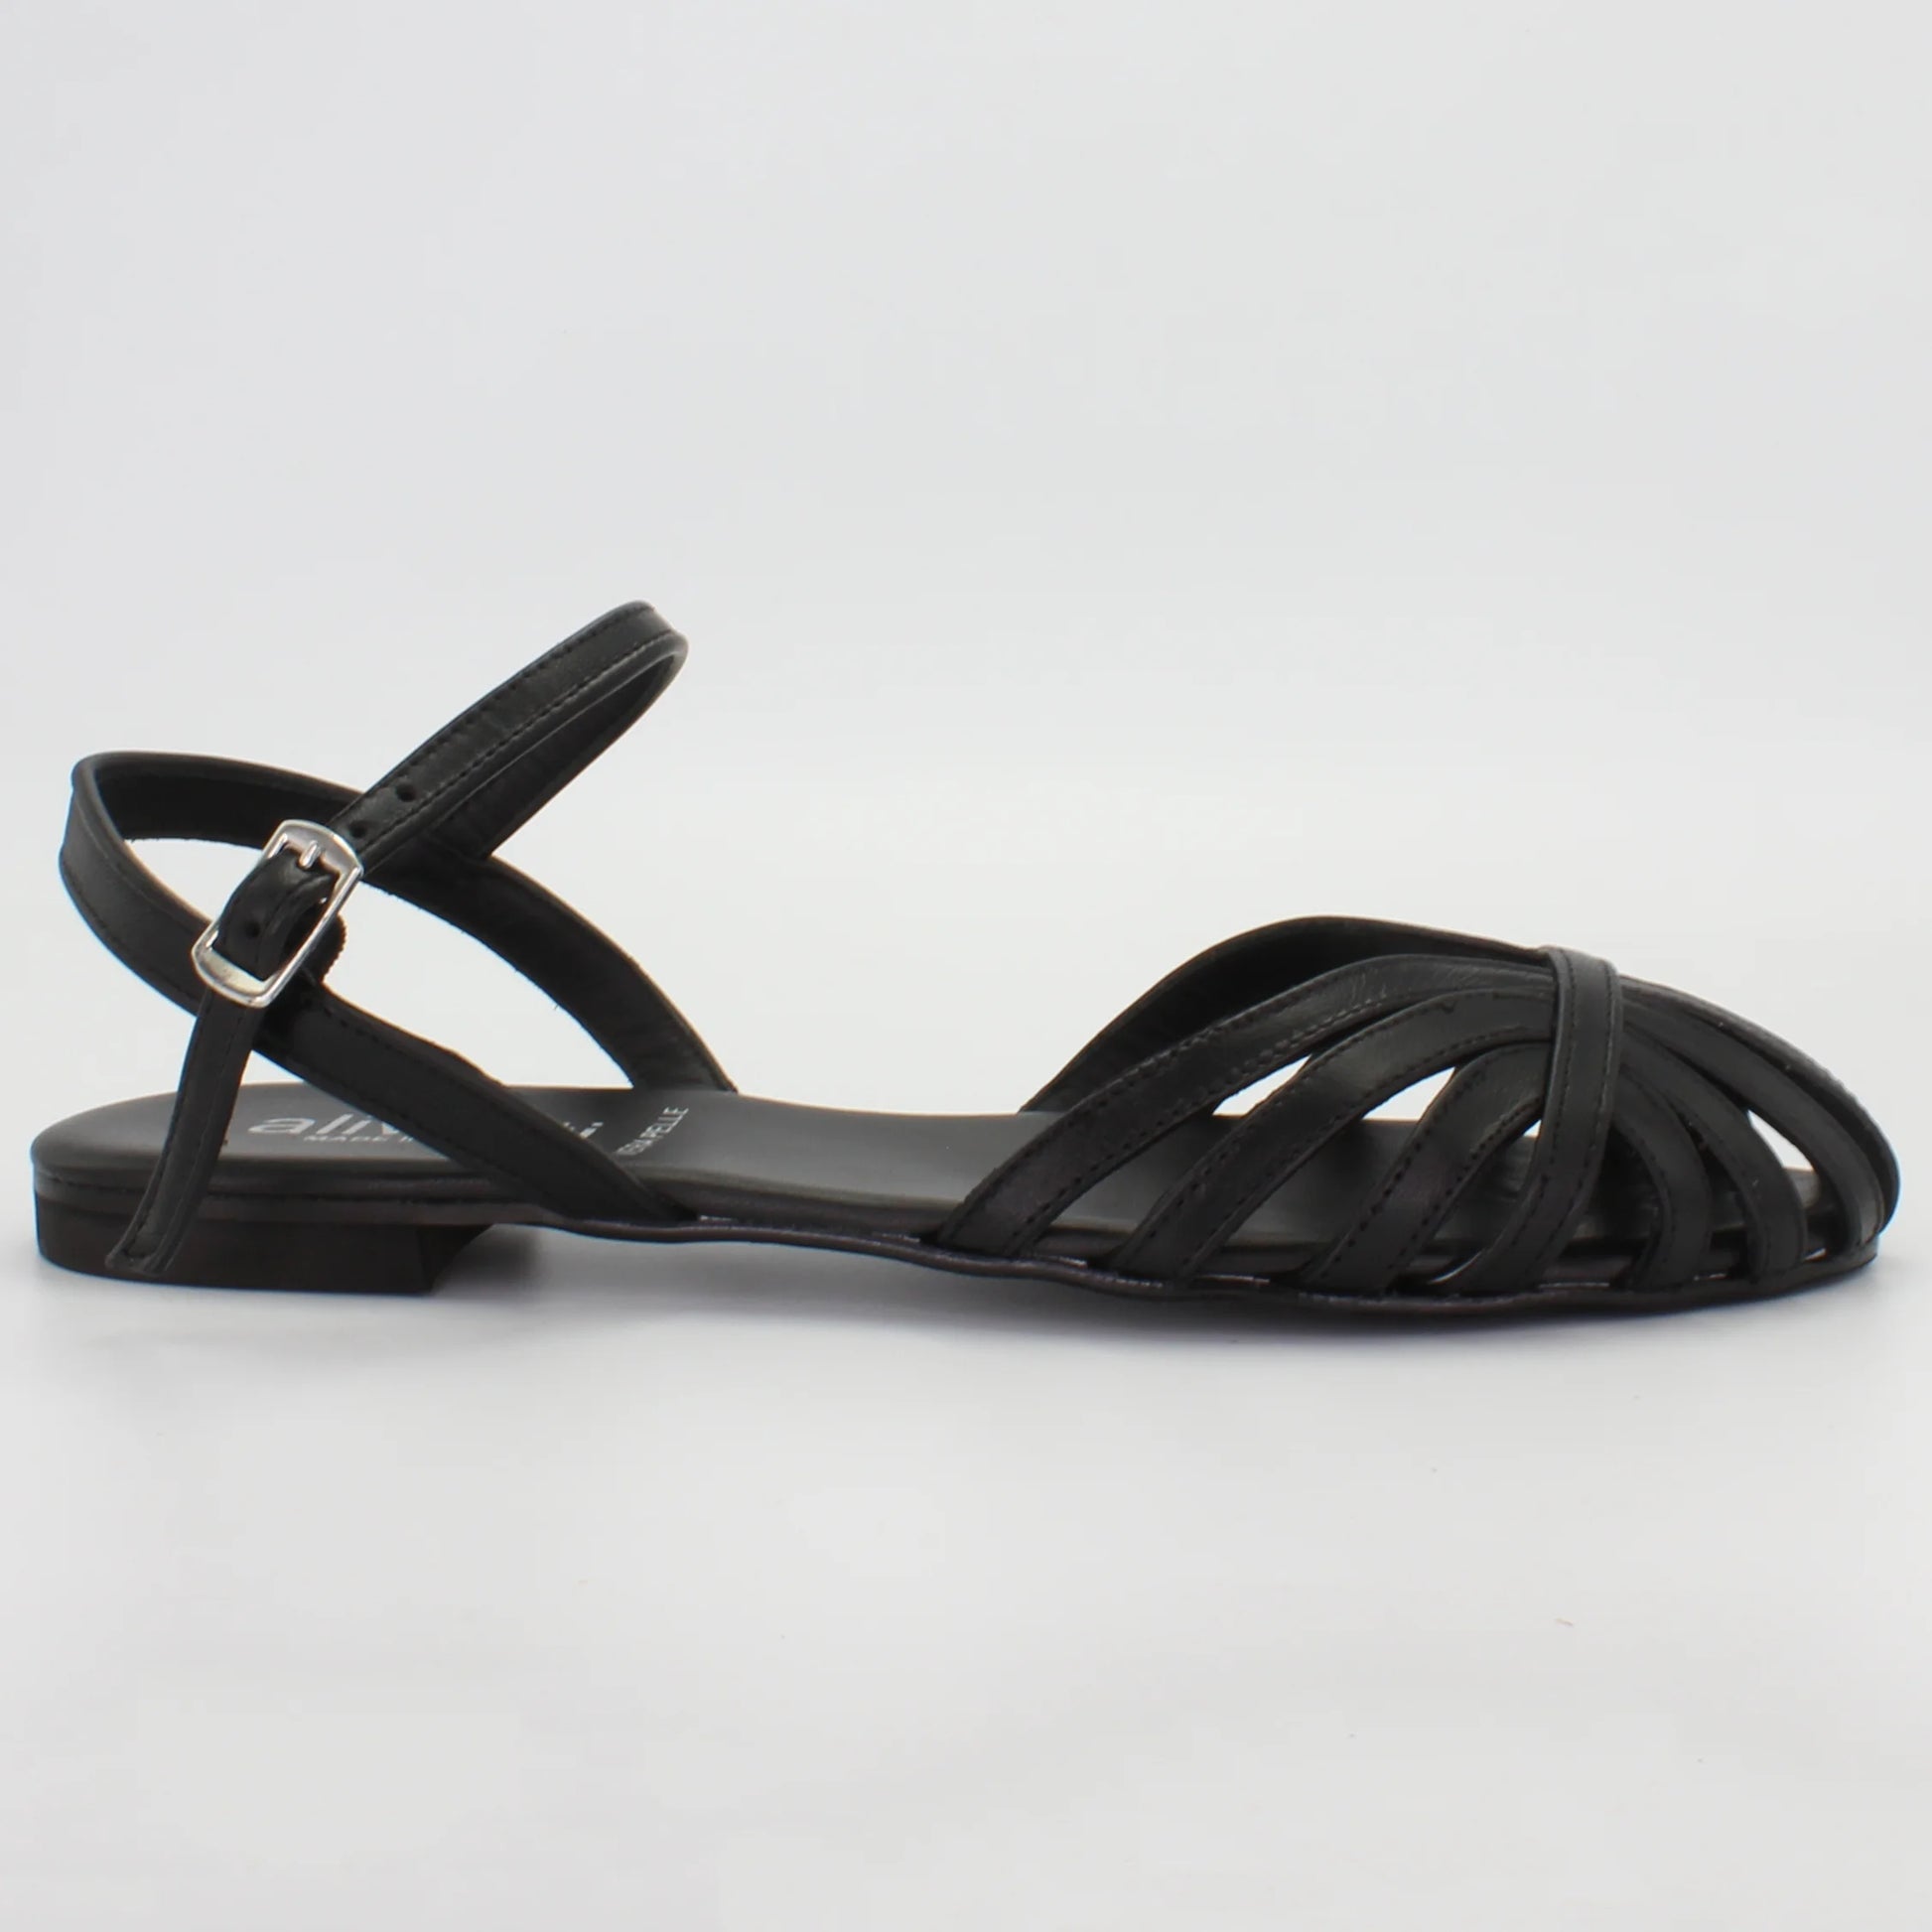 Shop Handmade Italian Leather sandal in nero (G500) or browse our range of hand-made Italian shoes in leather or suede in-store at Aliverti Cape Town, or shop online. We deliver in South Africa & offer multiple payment plans as well as accept multiple safe & secure payment methods.